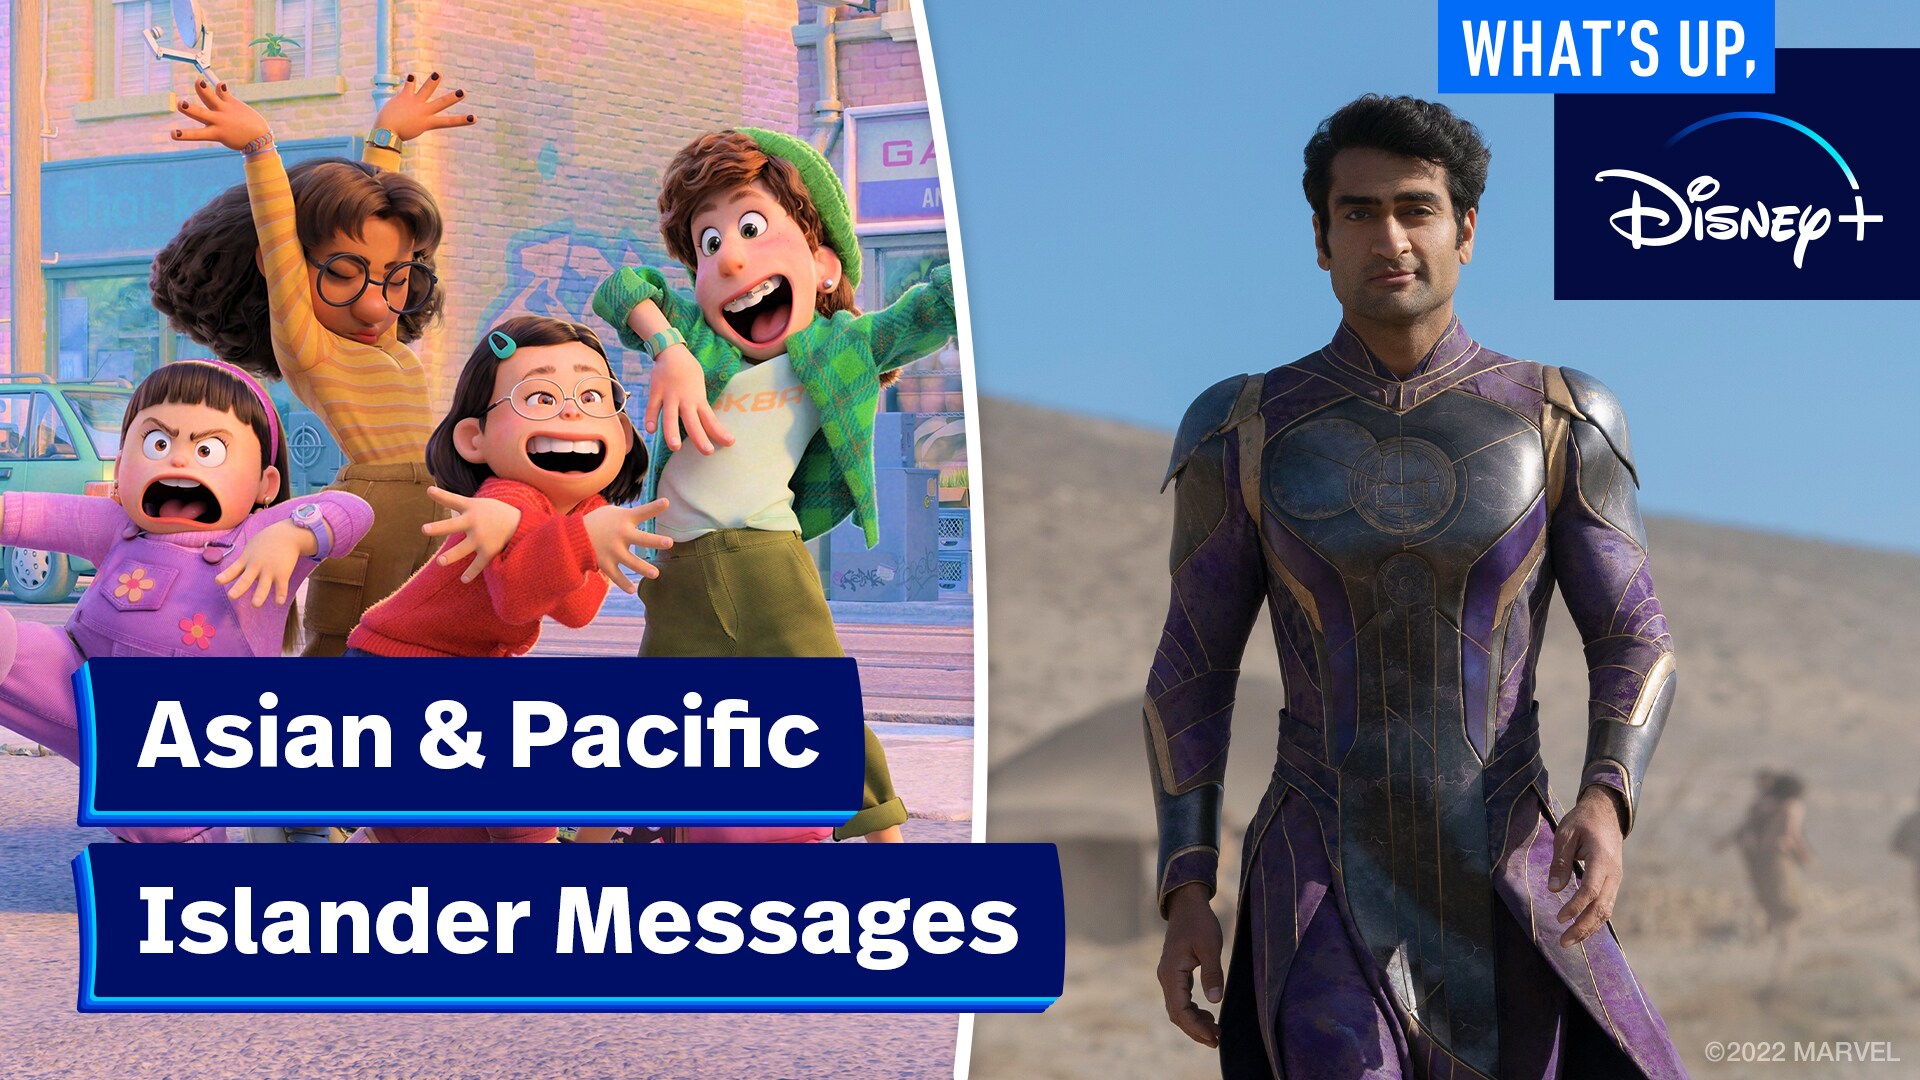 Asian & Pacific Islander Messages | What's Up, Disney+